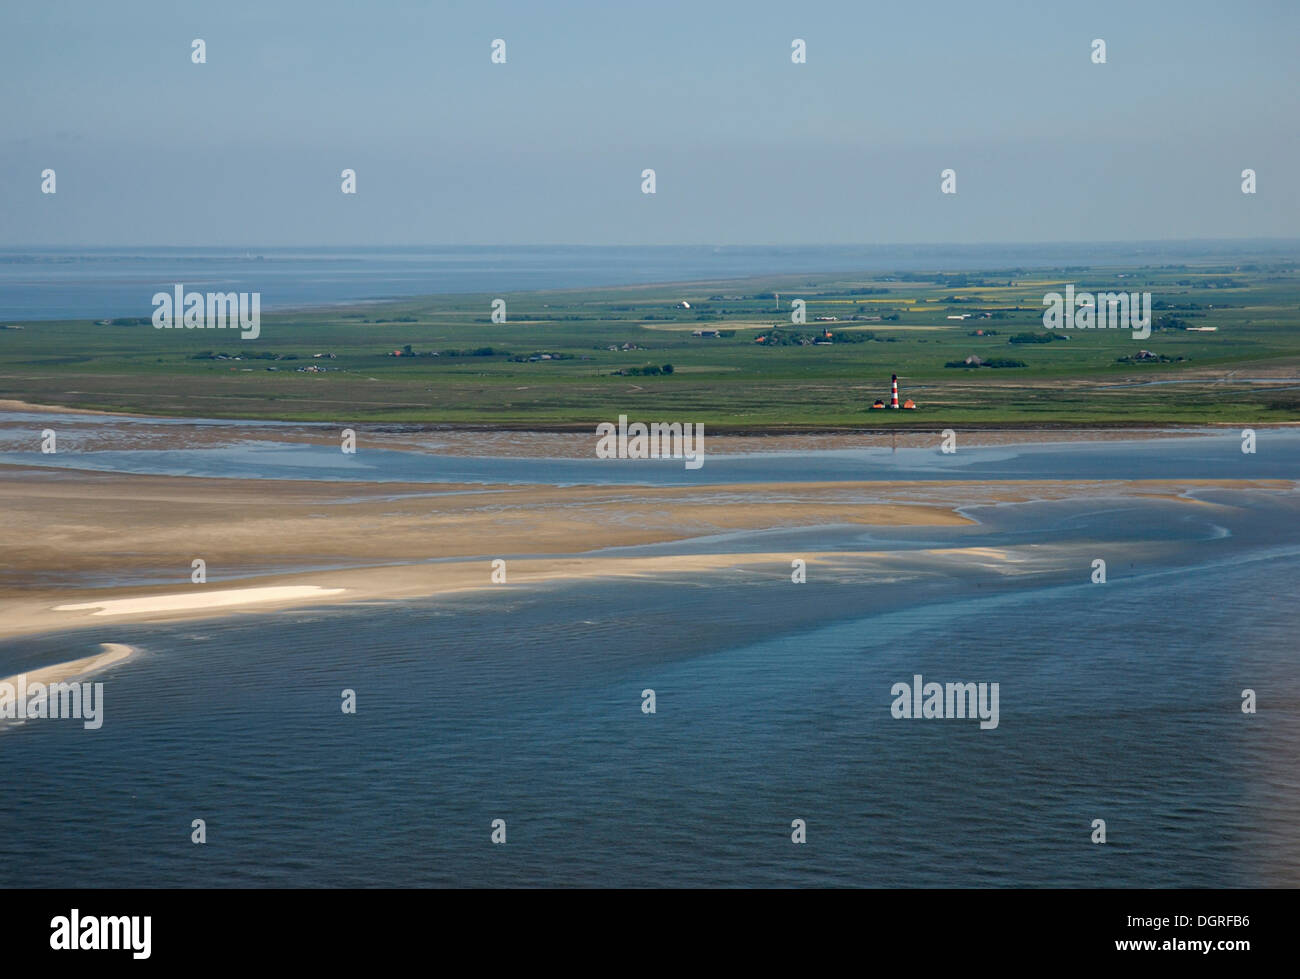 View of the Westerhever lighthouse with an offshore barrier beach, sand bank and the hinterland of the Eiderstedt peninsula, Stock Photo